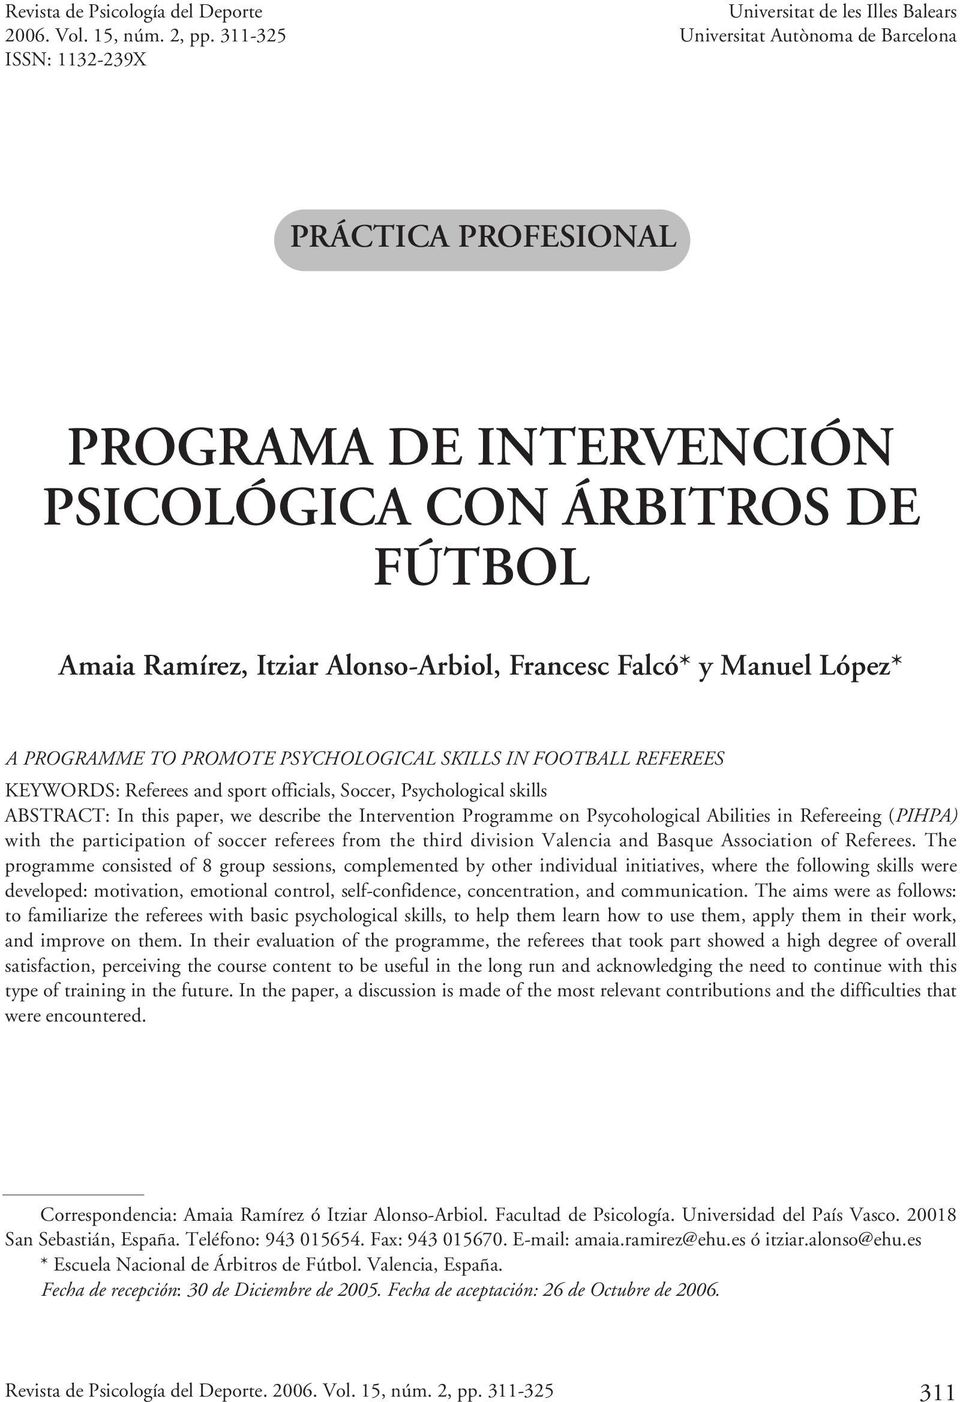 Alonso-Arbiol, Francesc Falcó* y Manuel López* A PROGRAMME TO PROMOTE PSYCHOLOGICAL SKILLS IN FOOTBALL REFEREES KEYWORDS: Referees and sport officials, Soccer, Psychological skills ABSTRACT: In this